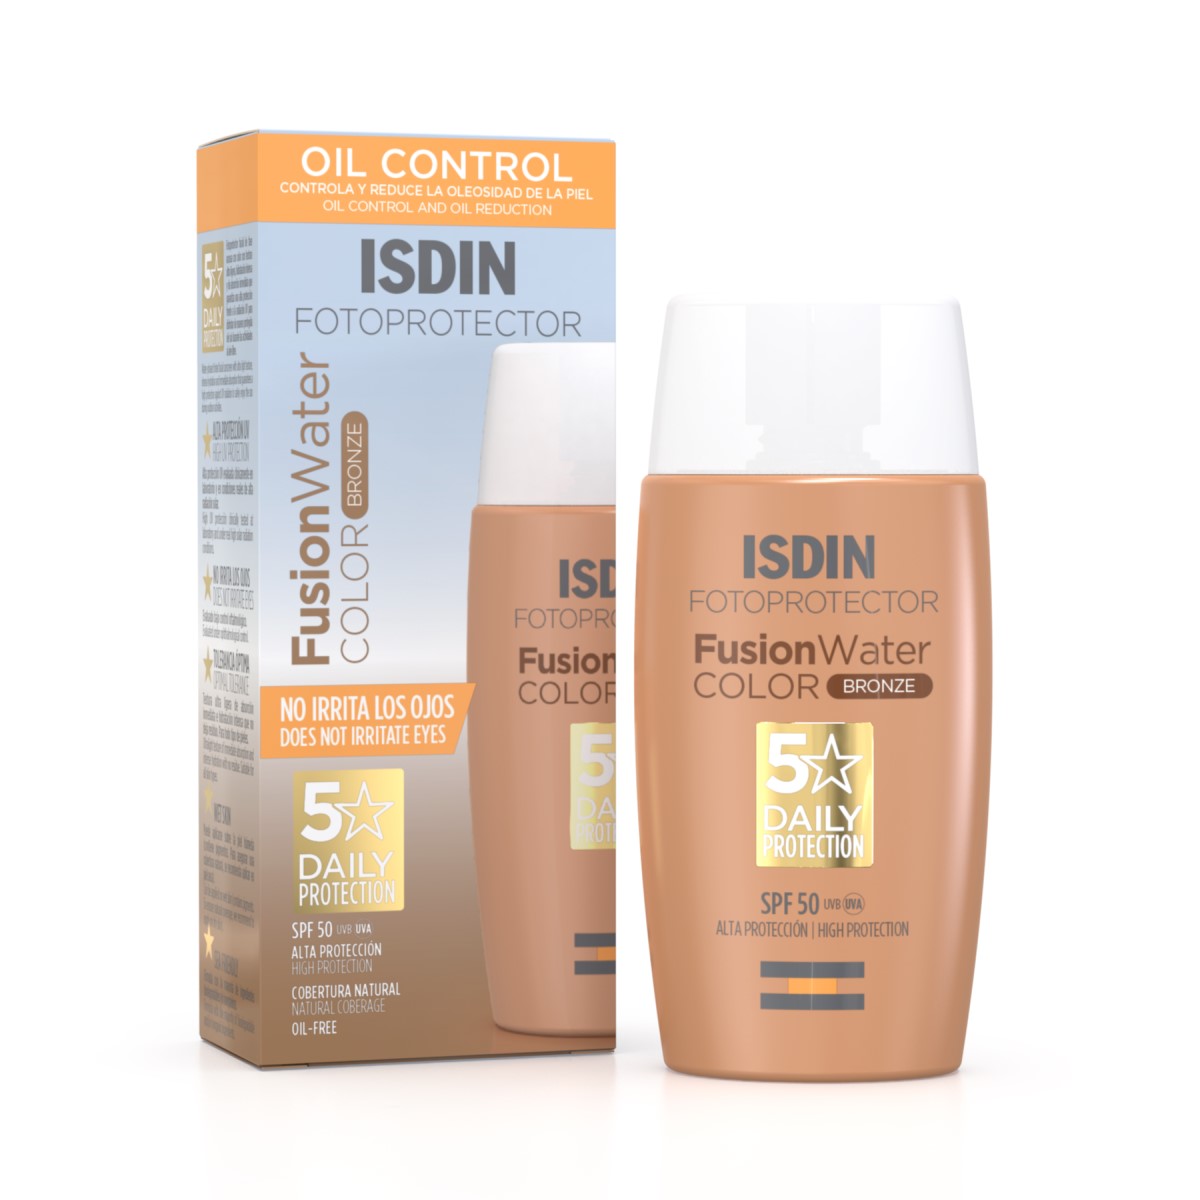 ISDIN FOTOPROTECTOR SPF 50 FUSION WATER COLOR BRONZE 50 ML | The Glow Shop